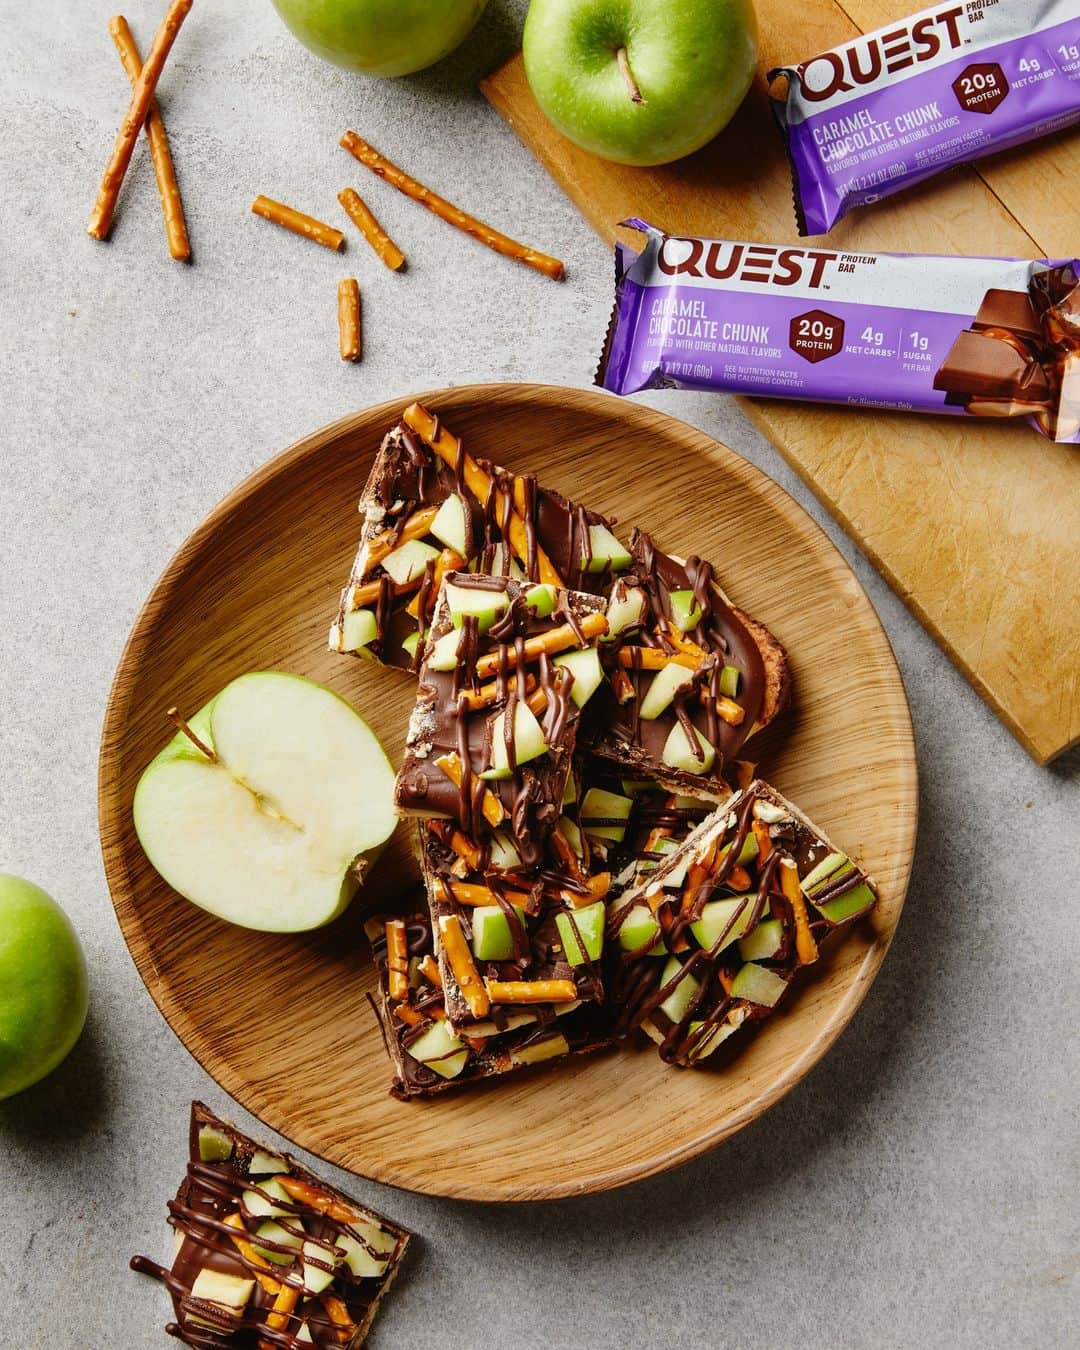 questnutritionのインスタグラム：「Questified Chocolate Caramel Almond Bark 😍😋🤌 • 👉 FULL RECIPE LINK IN BIO (swipe left to 2nd card)👈 • Per serving: 4g protein, 15g carb, 5g fat. (6g net carbs) #OnaQuest #QuestNutrition #QuestBar」